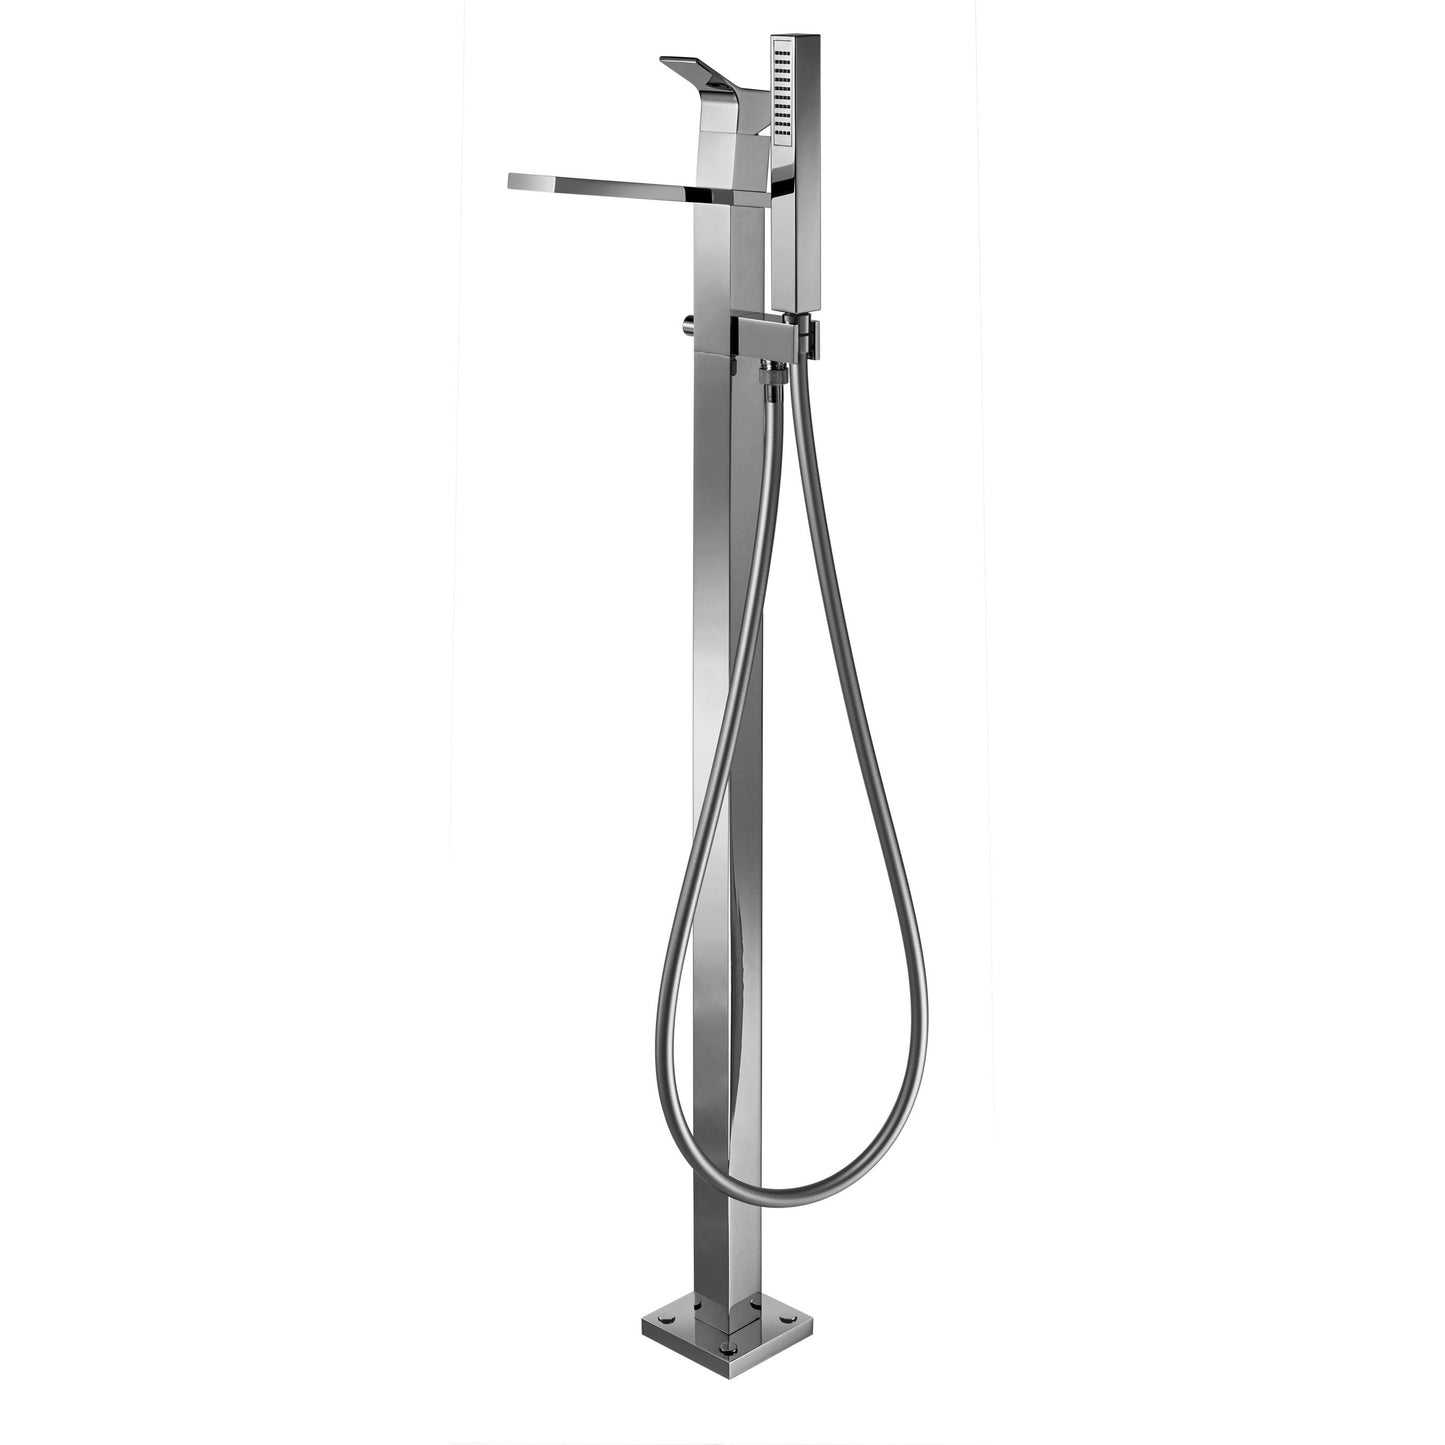 Bath faucet Young freestanding single lever 071156